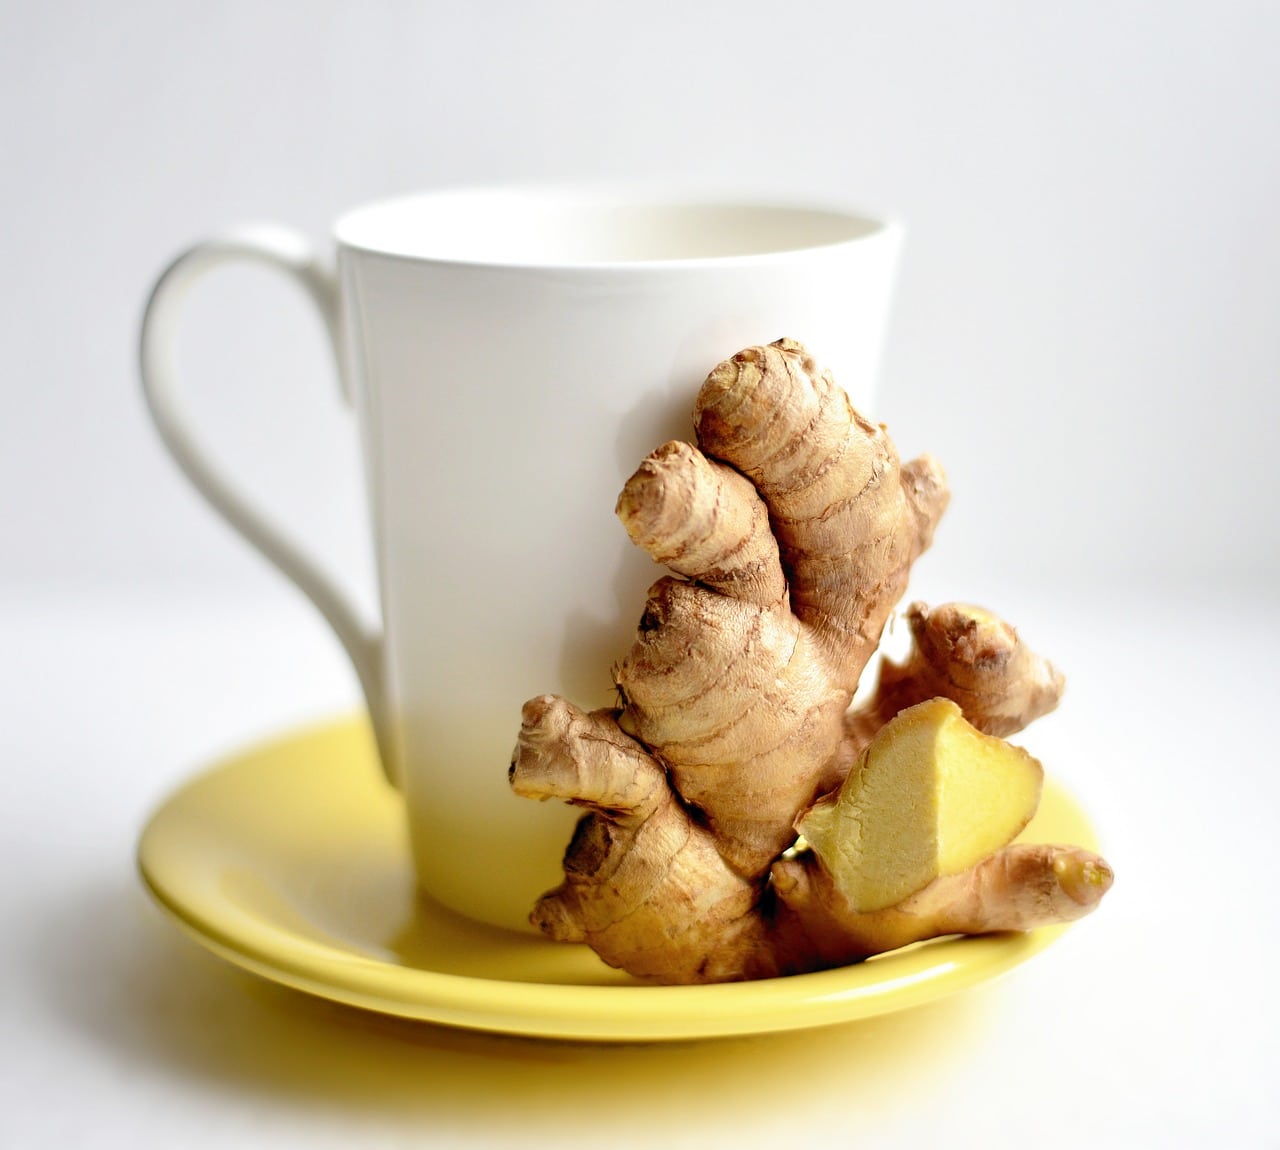 ginger kept in a yellow tea plate with a white tea mug